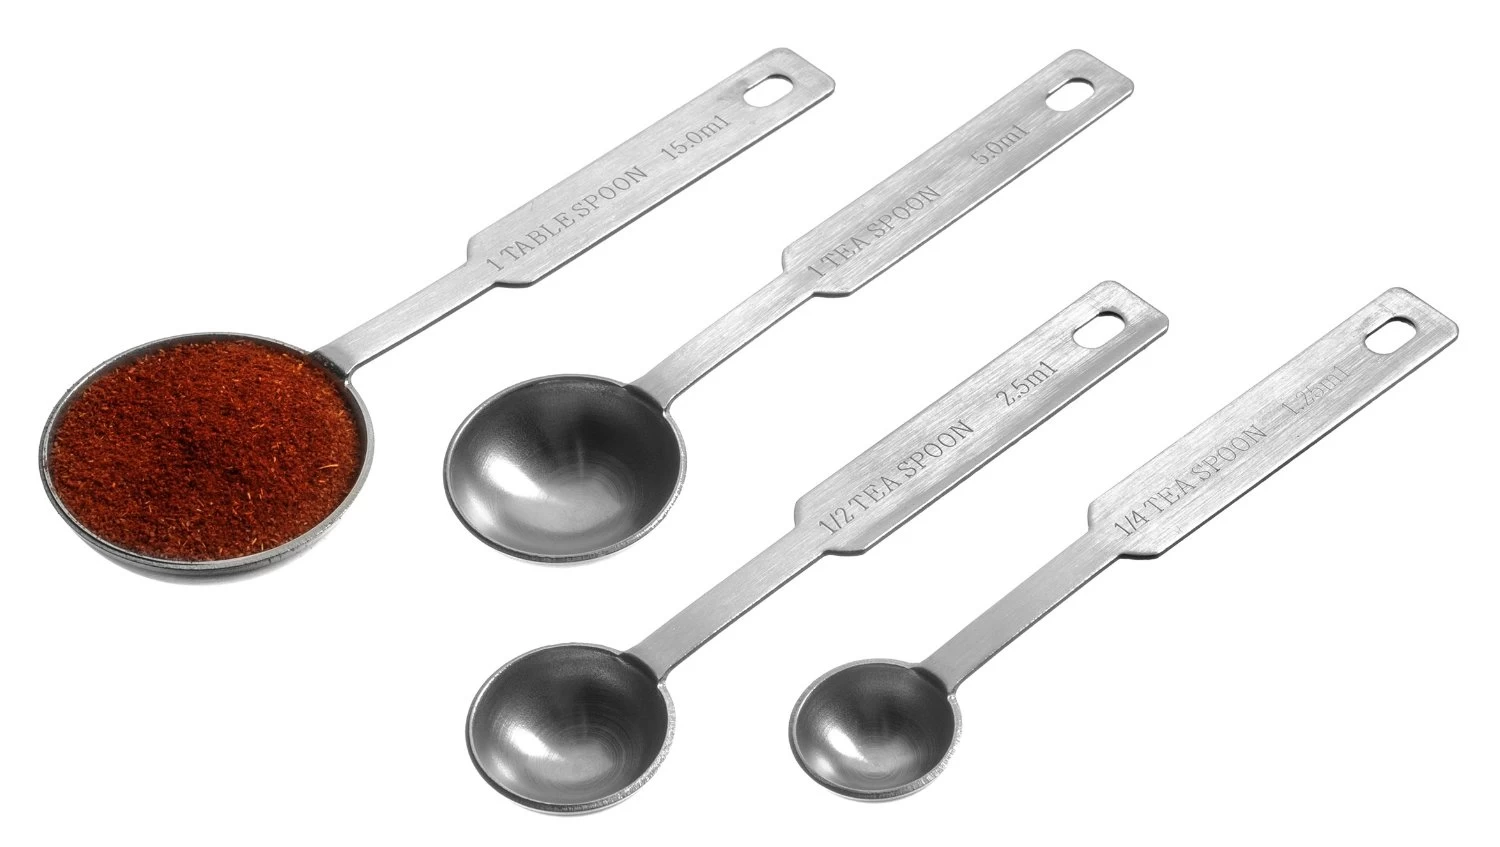 Stainless Steel Mearsuring Spoon china, Stainless Steel Mearsuring Spoon supplier